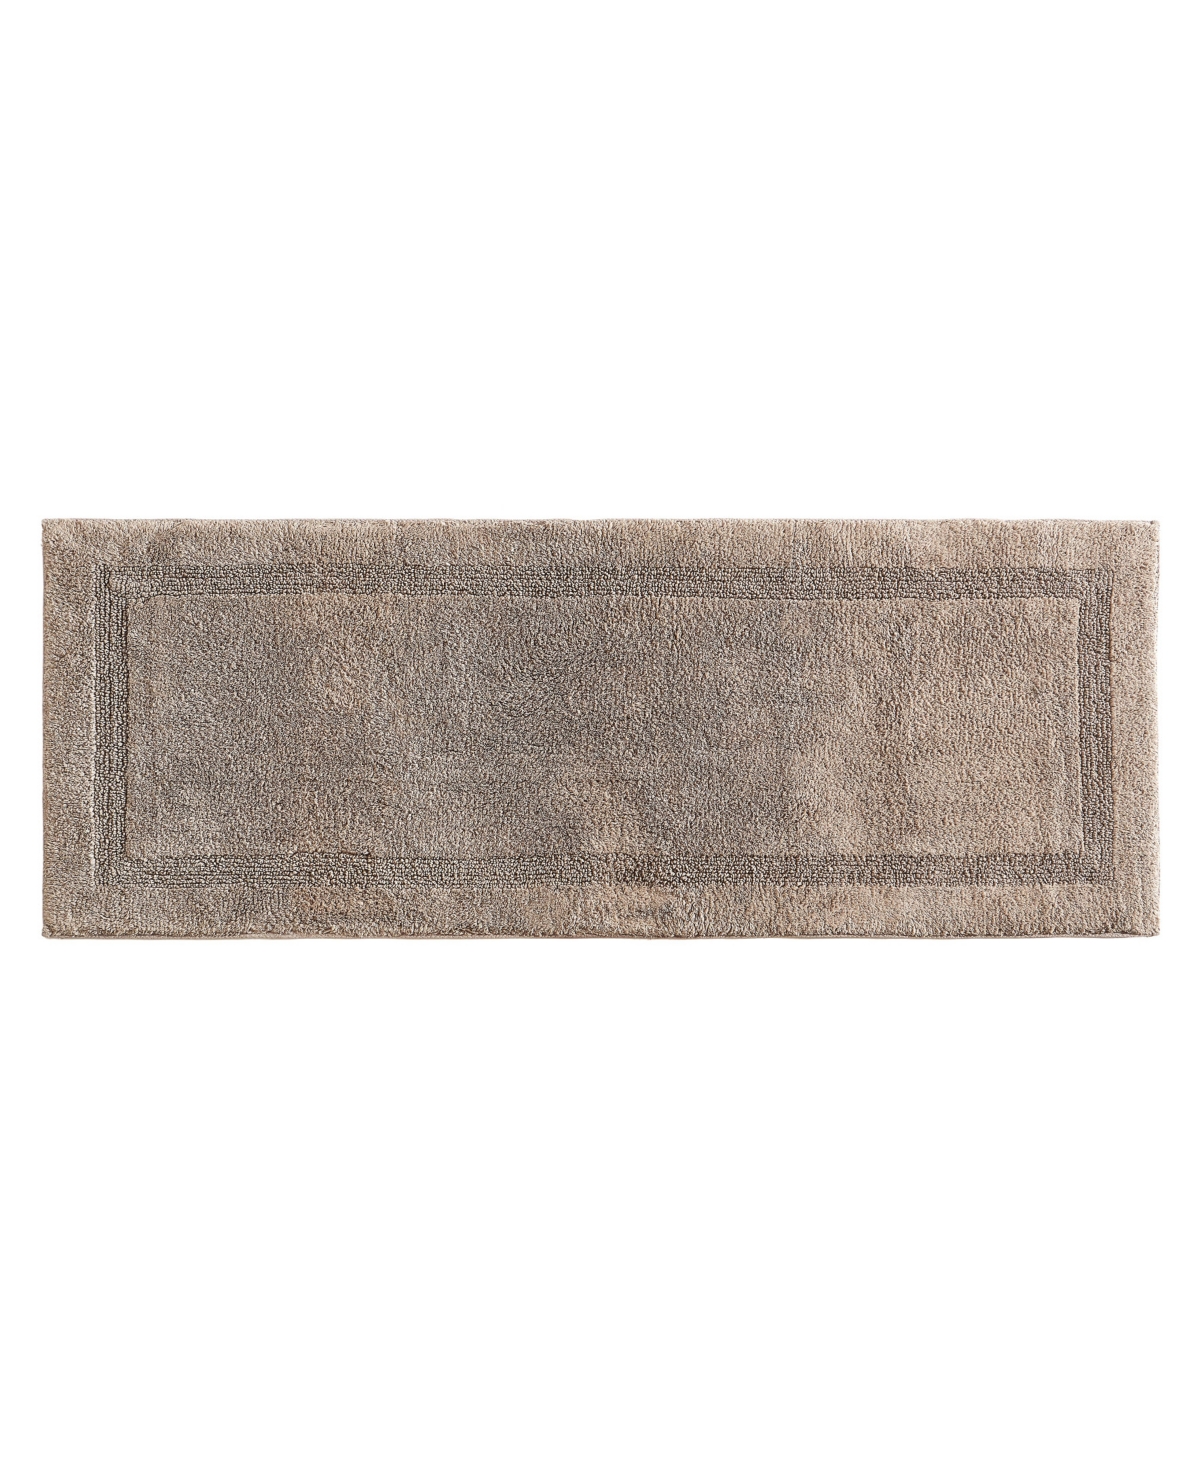 Nautica Peniston Solid Cotton Tufted Bath Runner Rug, 60" X 22" In Brindle